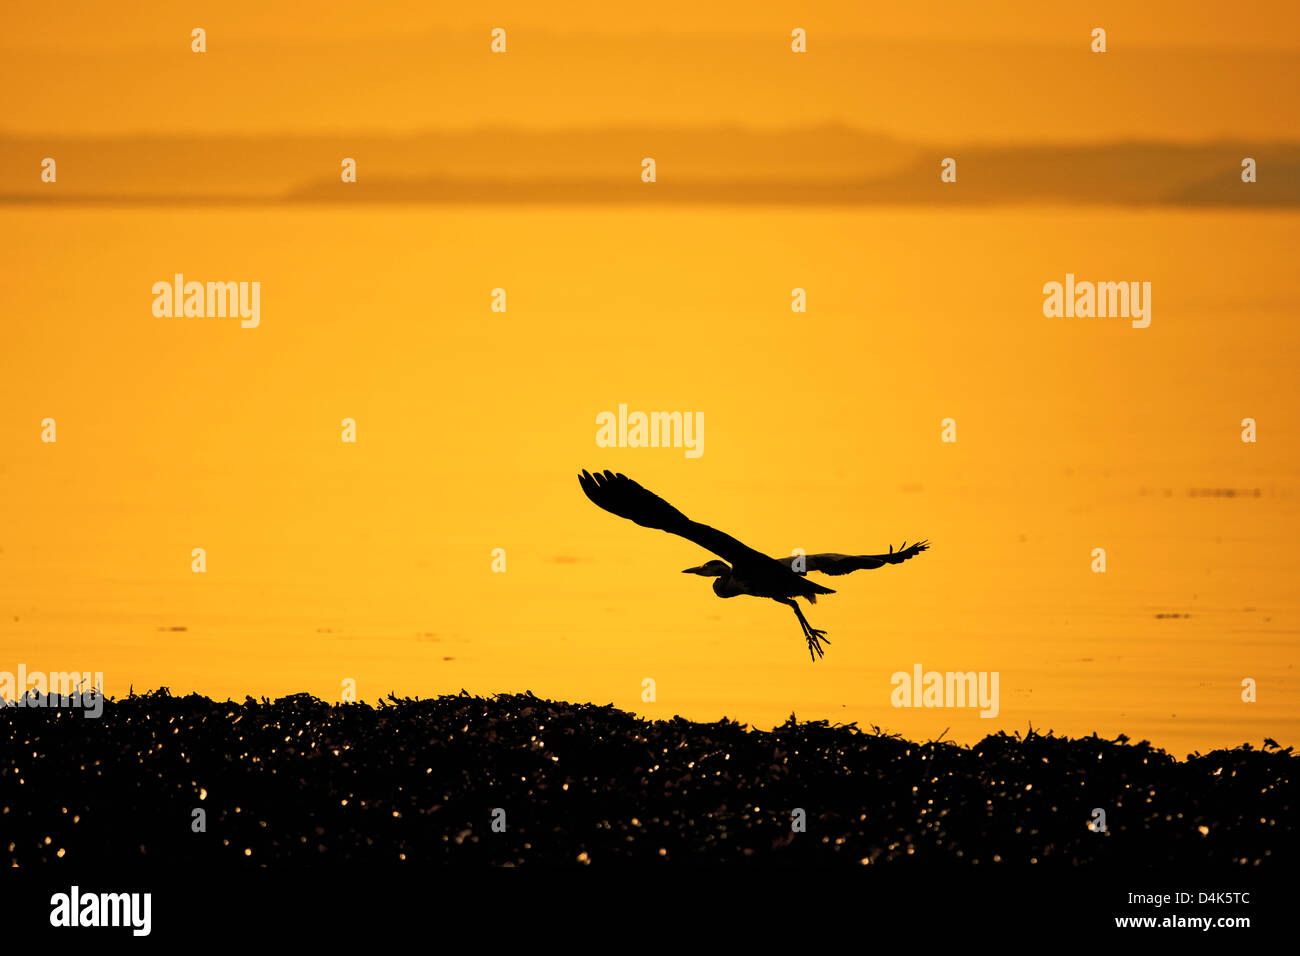 Silhouette of heron flying over water Stock Photo